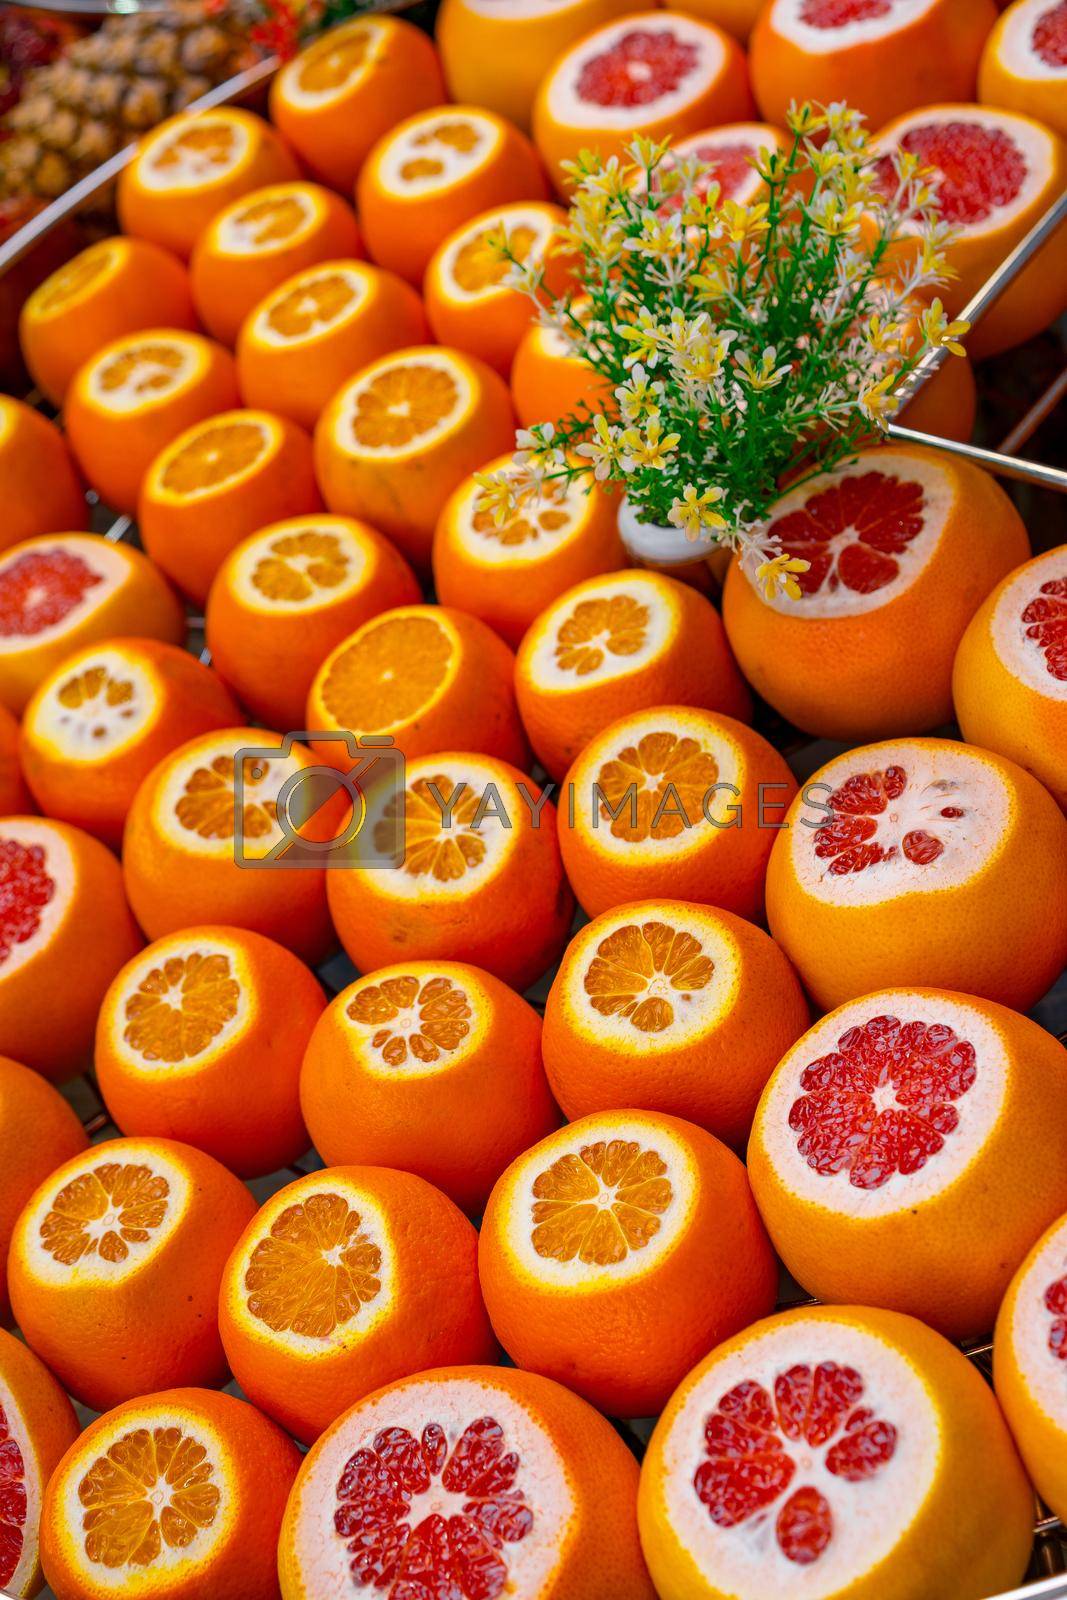 Royalty free image of Oranges and grapefruits for juice on counter in Istanbul by Fabrikasimf